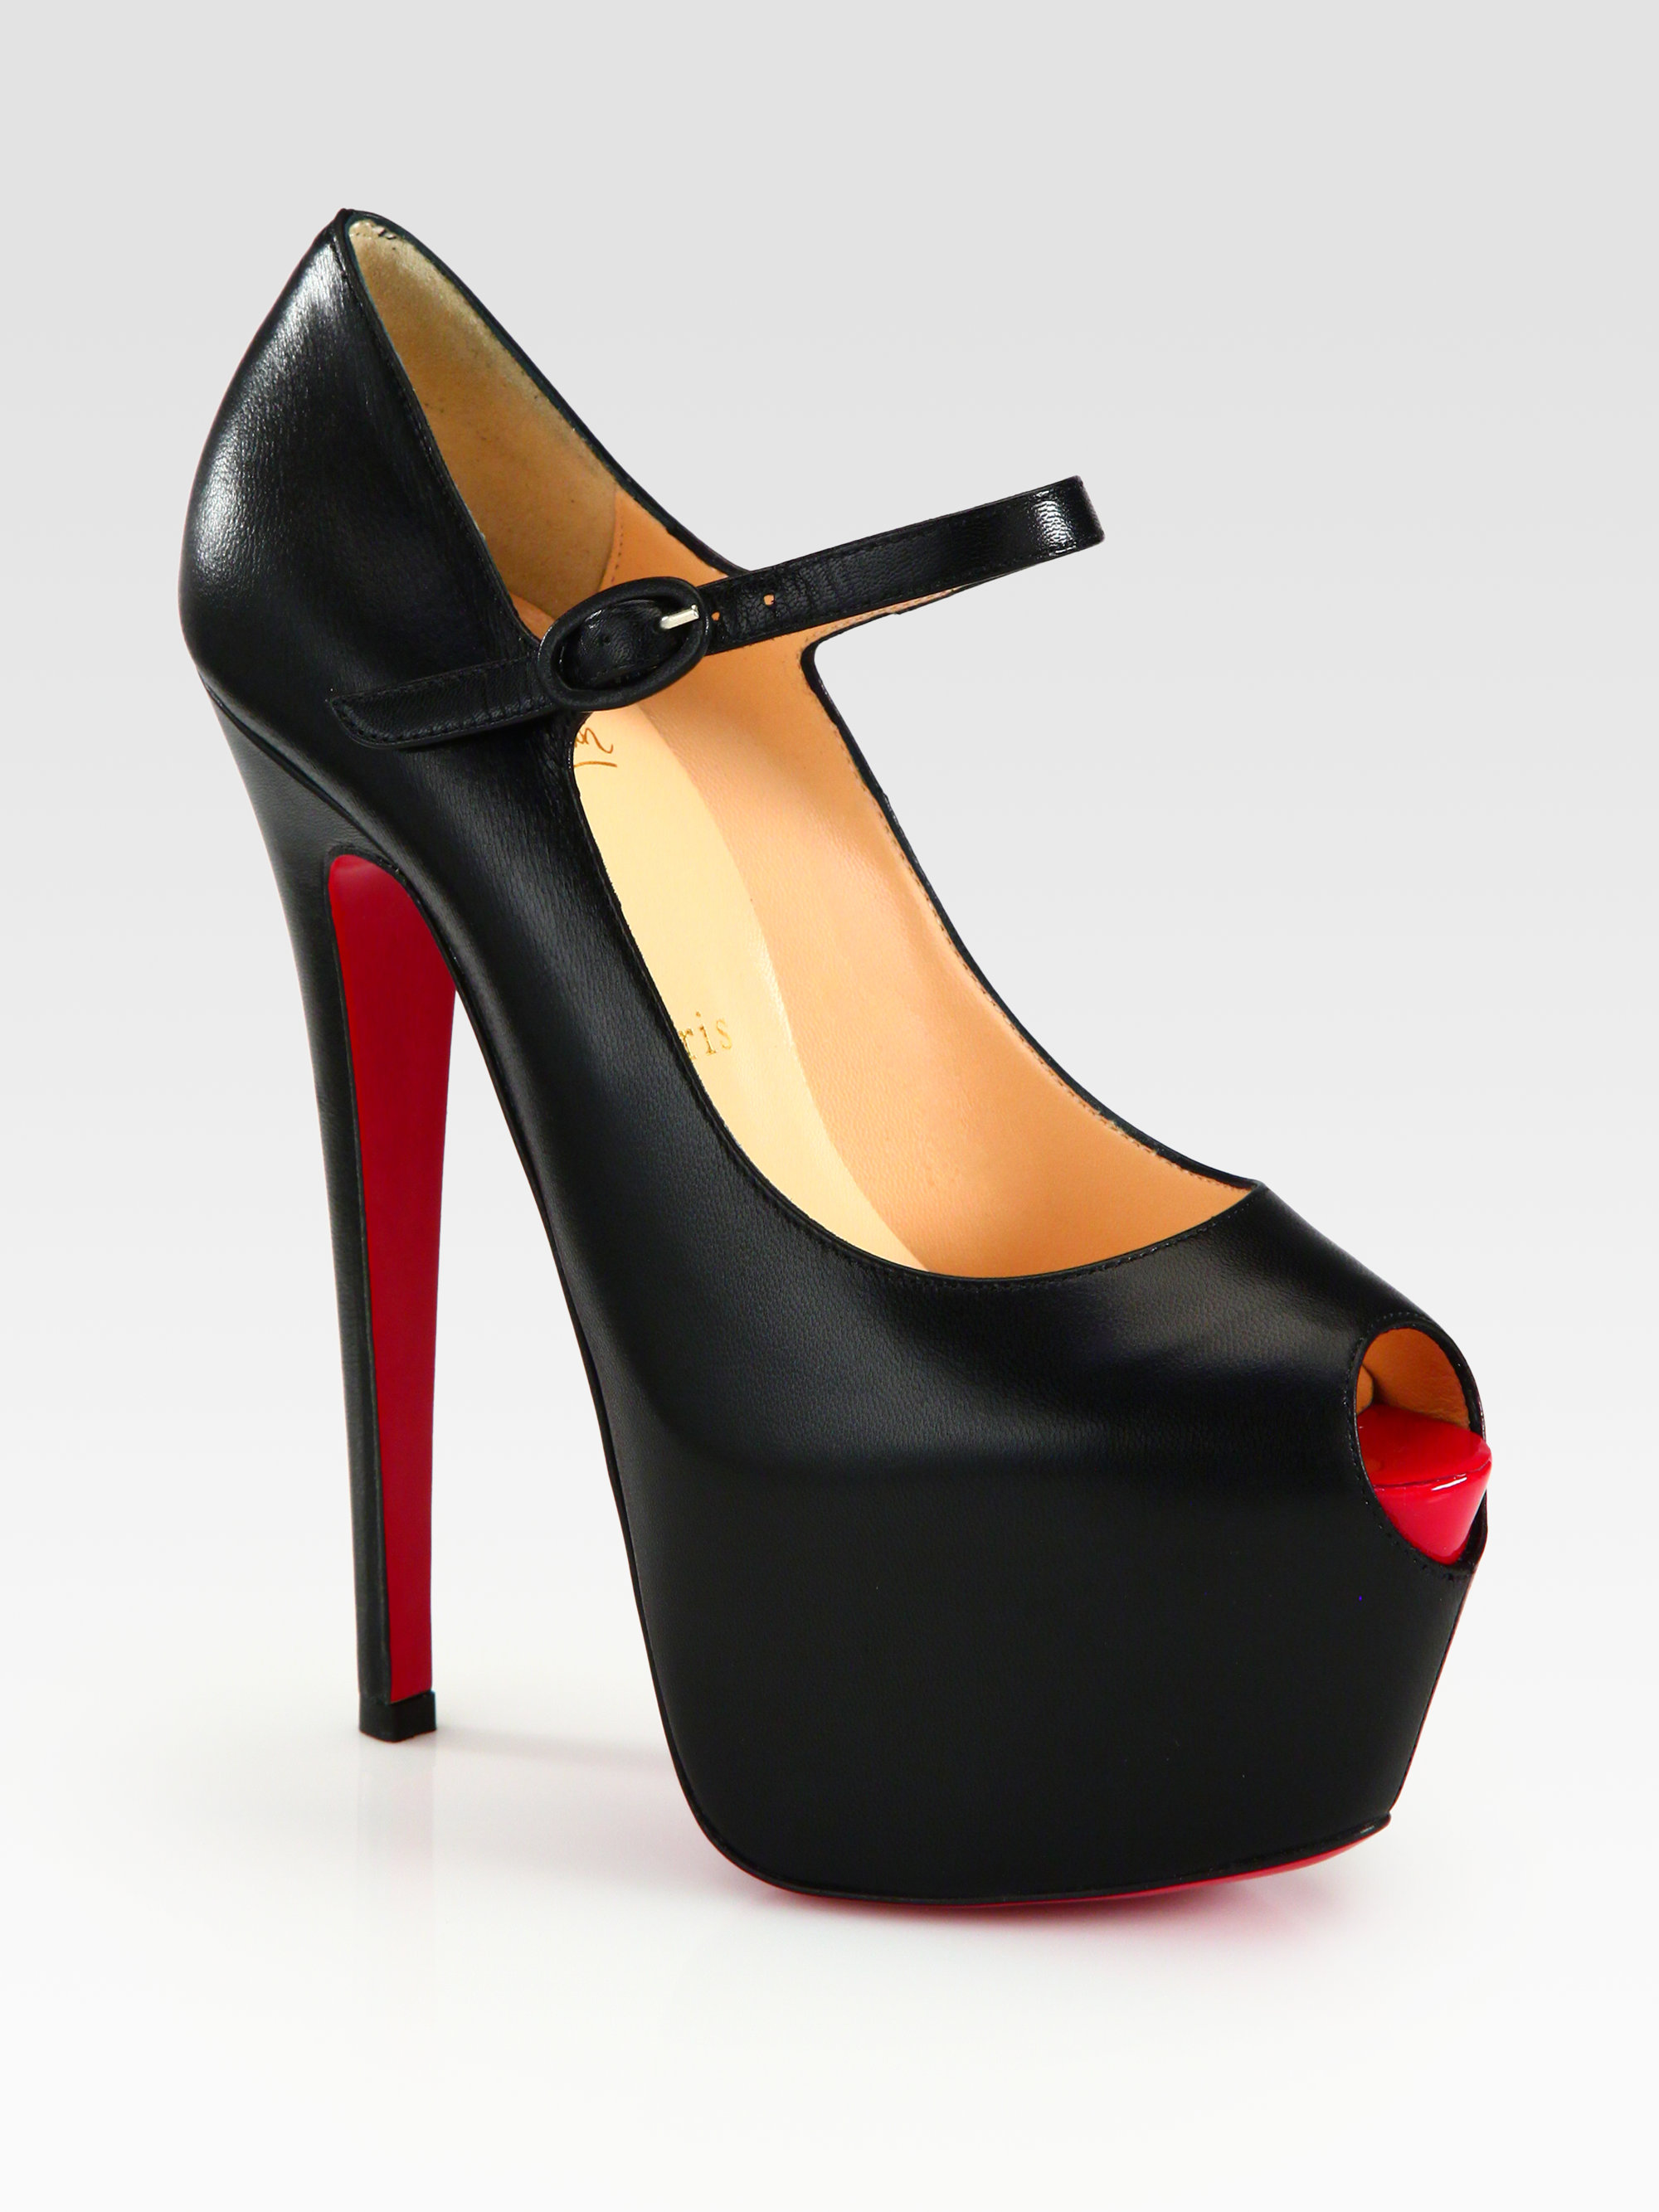 Lyst - Christian Louboutin Leather and Patent Leather Mary Jane ...